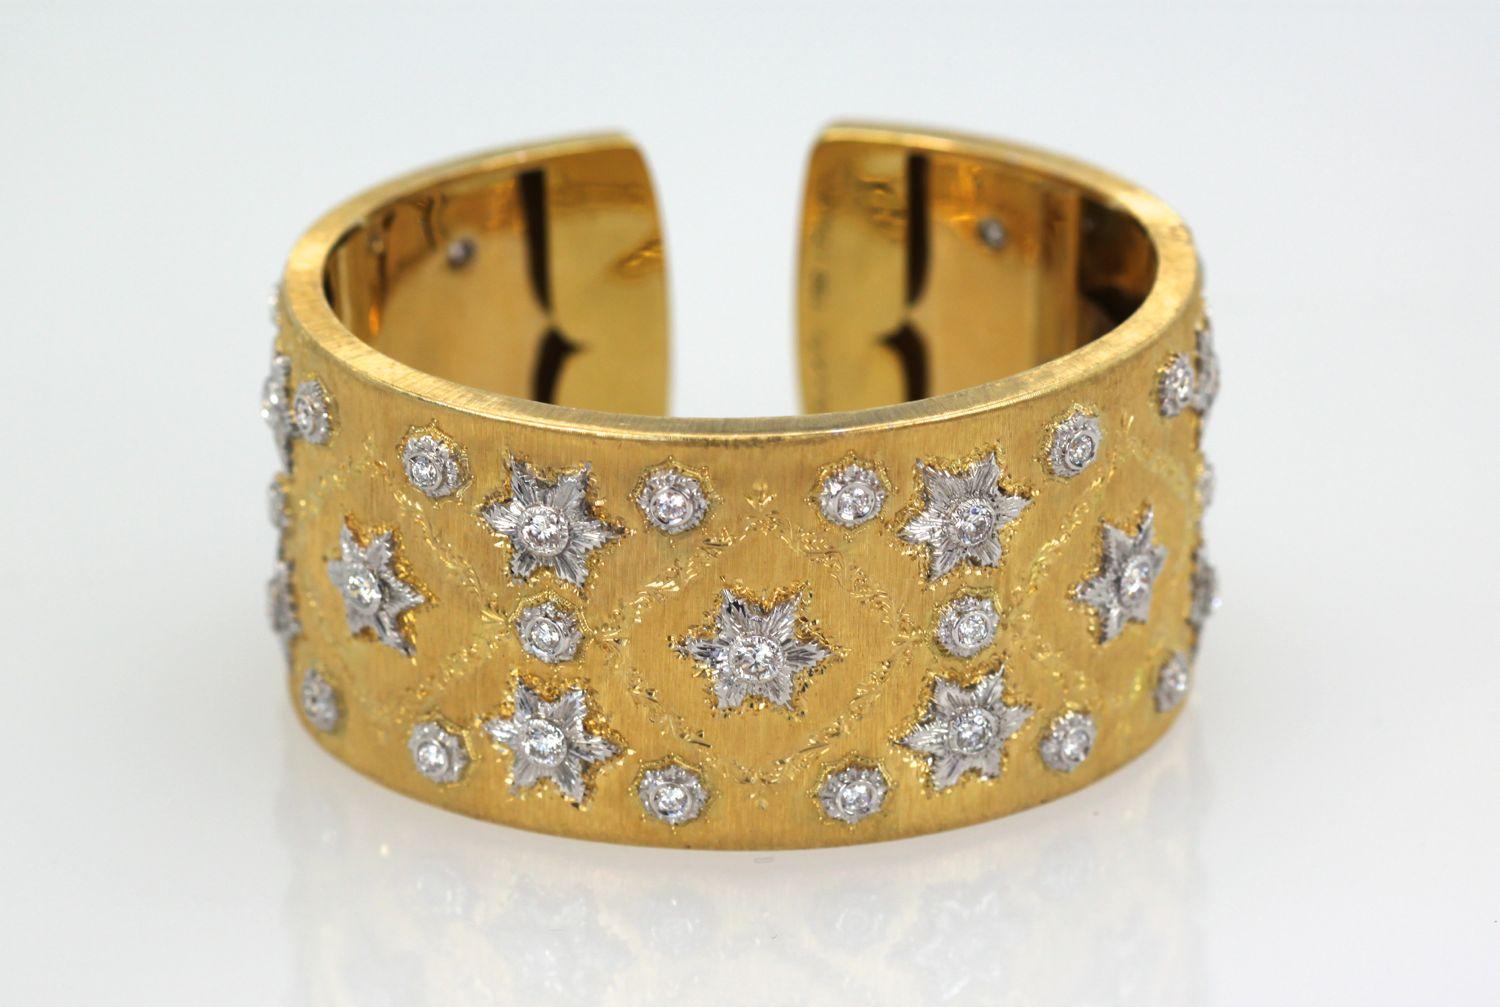 This Buccellati wide full Diamond bracelet is just gorgeous.  This bracelet is made up of Diamond Stars throughout.  There are 43 Diamonds and this bracelet fits a size 6.5 to 8